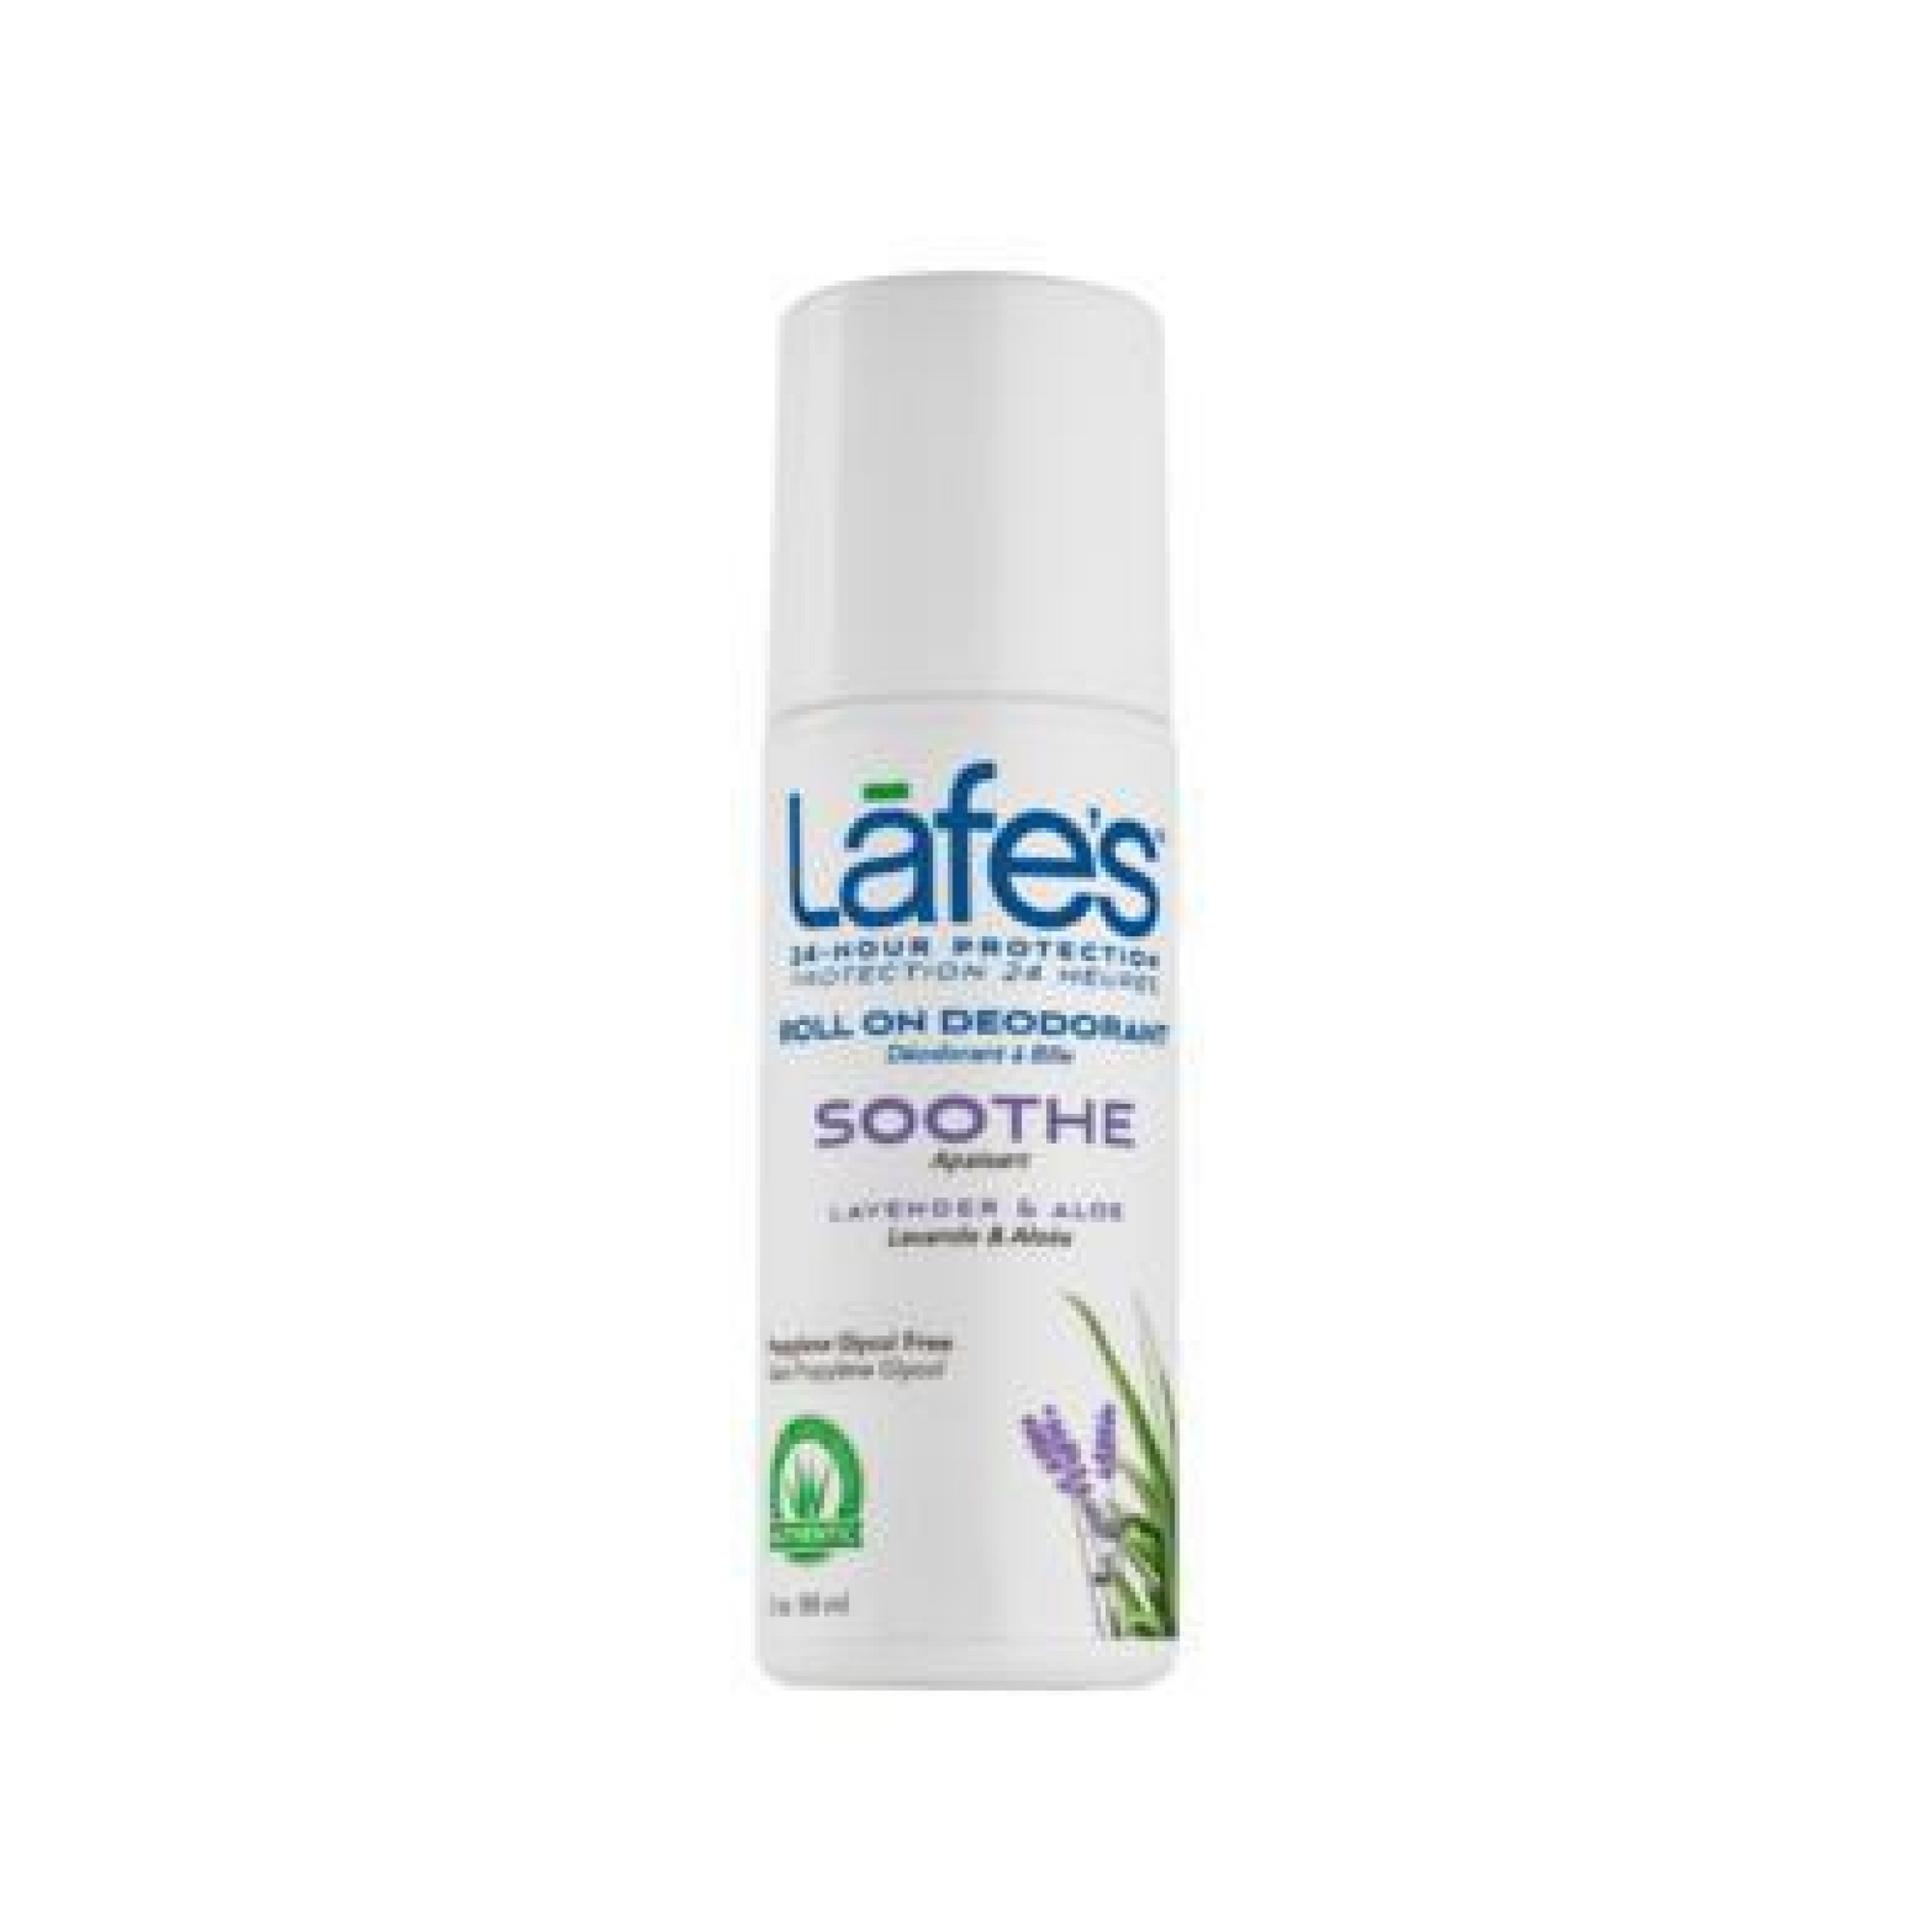 Lafe's Soothe Roll-On Deodorant 73ml